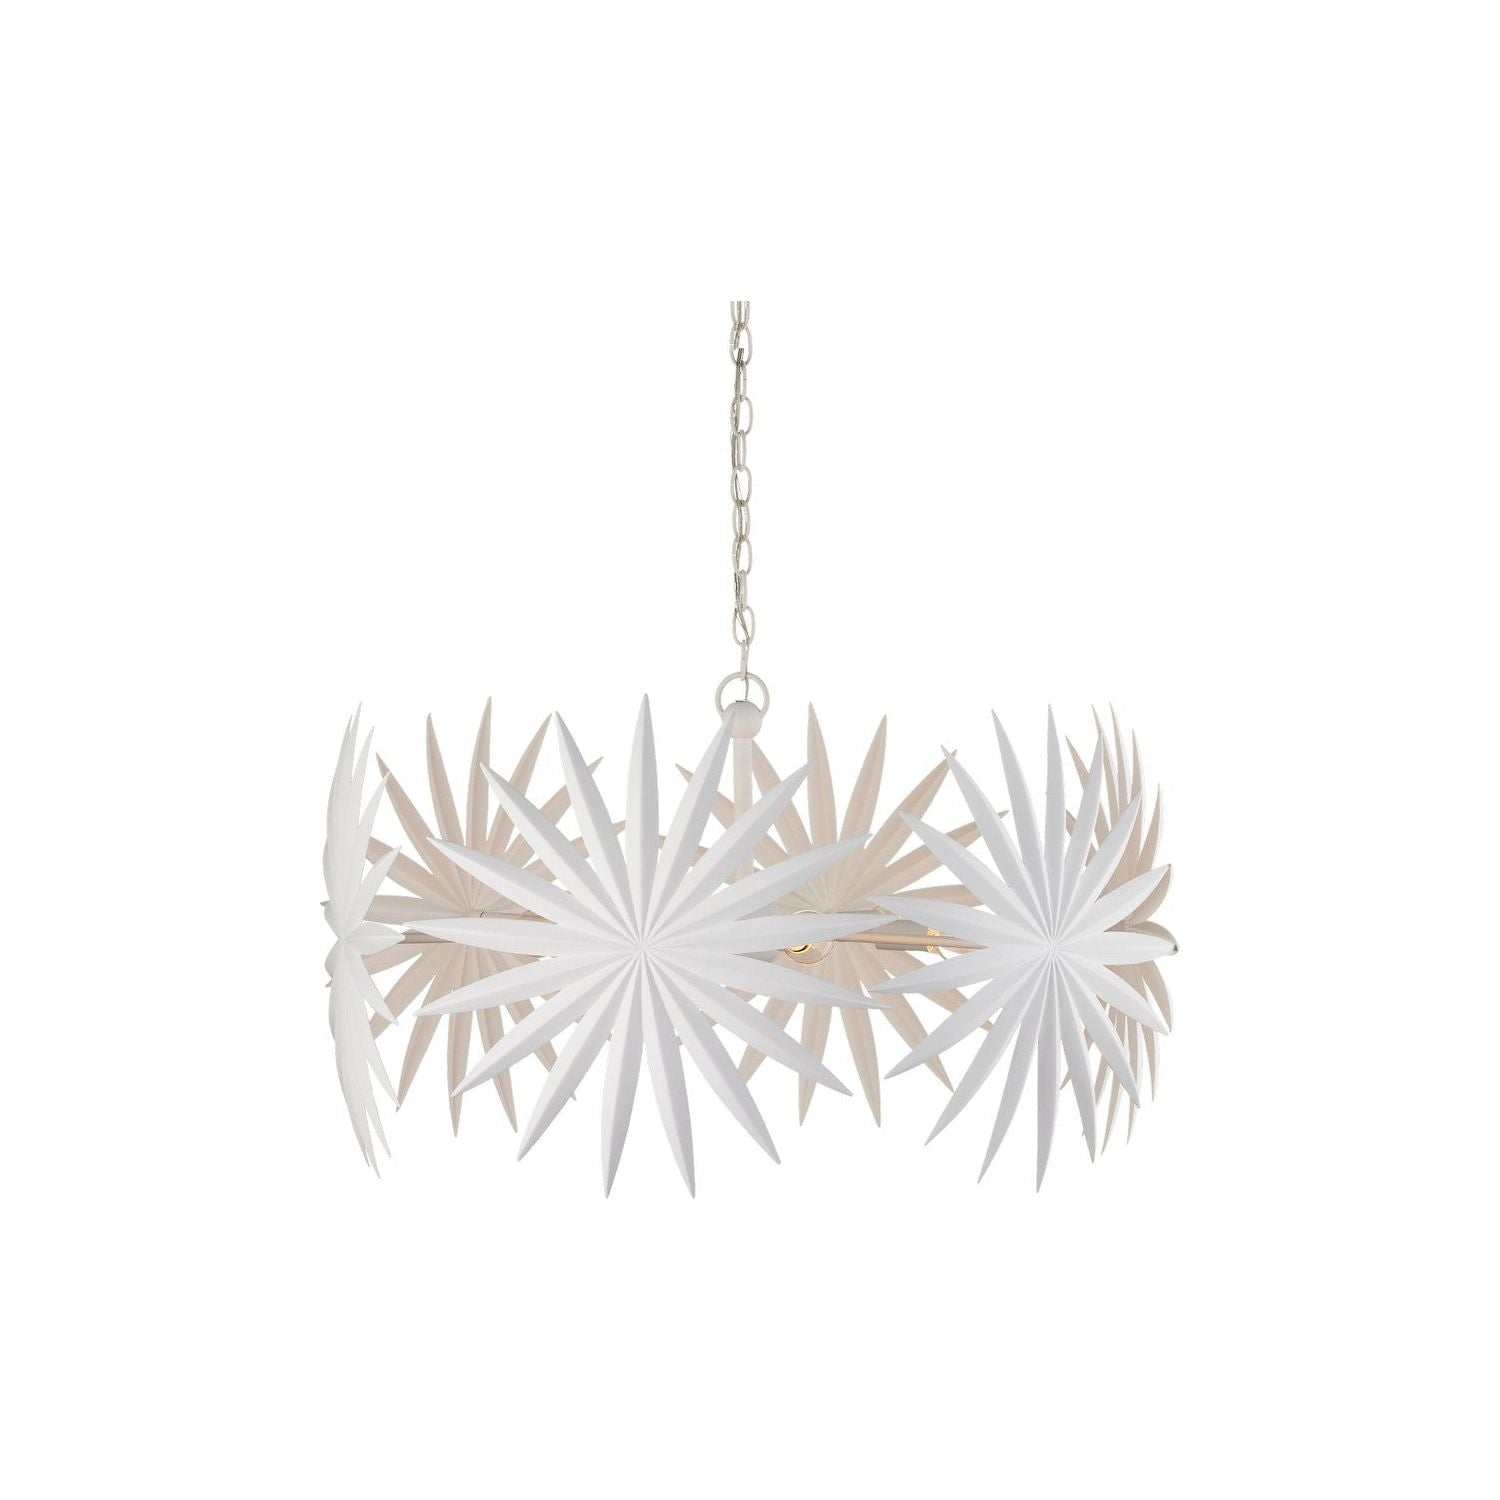 Currey and Company - 9000-1205 - Six Light Chandelier - Gesso White